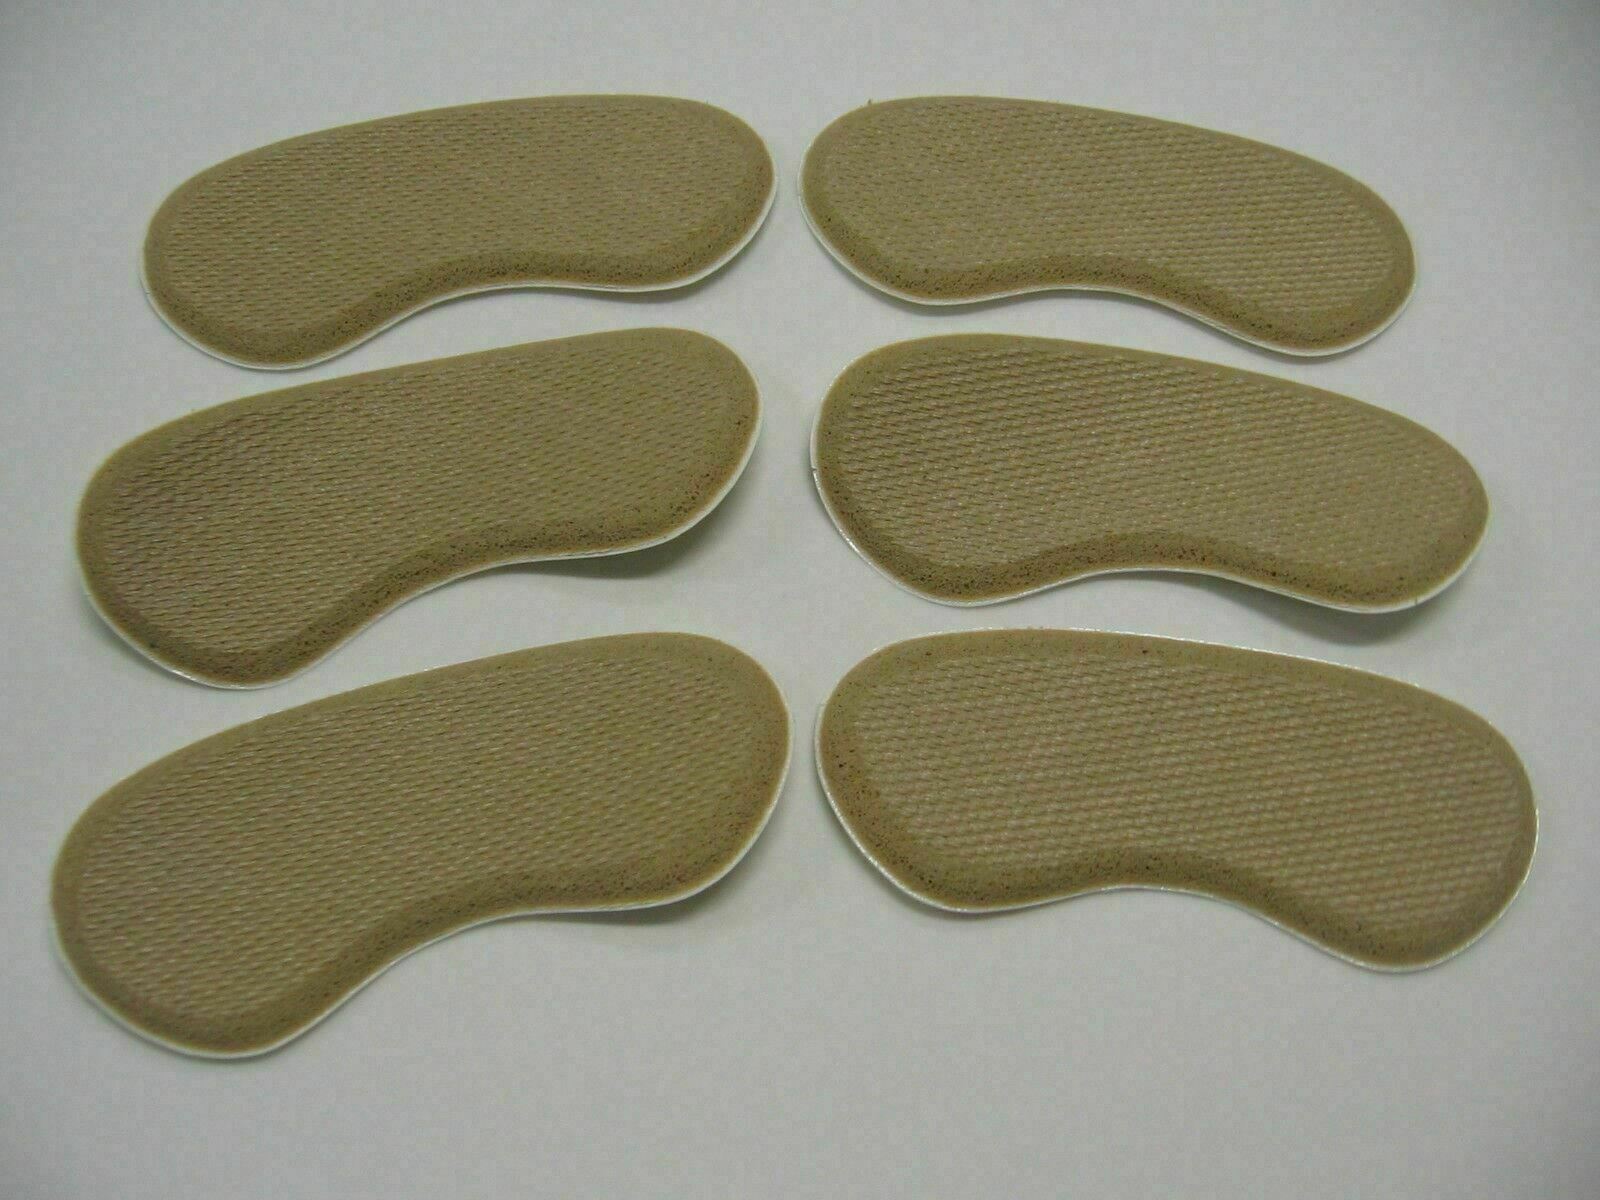 Heel Grippers - Rubber Shoe Grips Self Adhesive-3 Pair (6 grips) - FREE SHIPPING